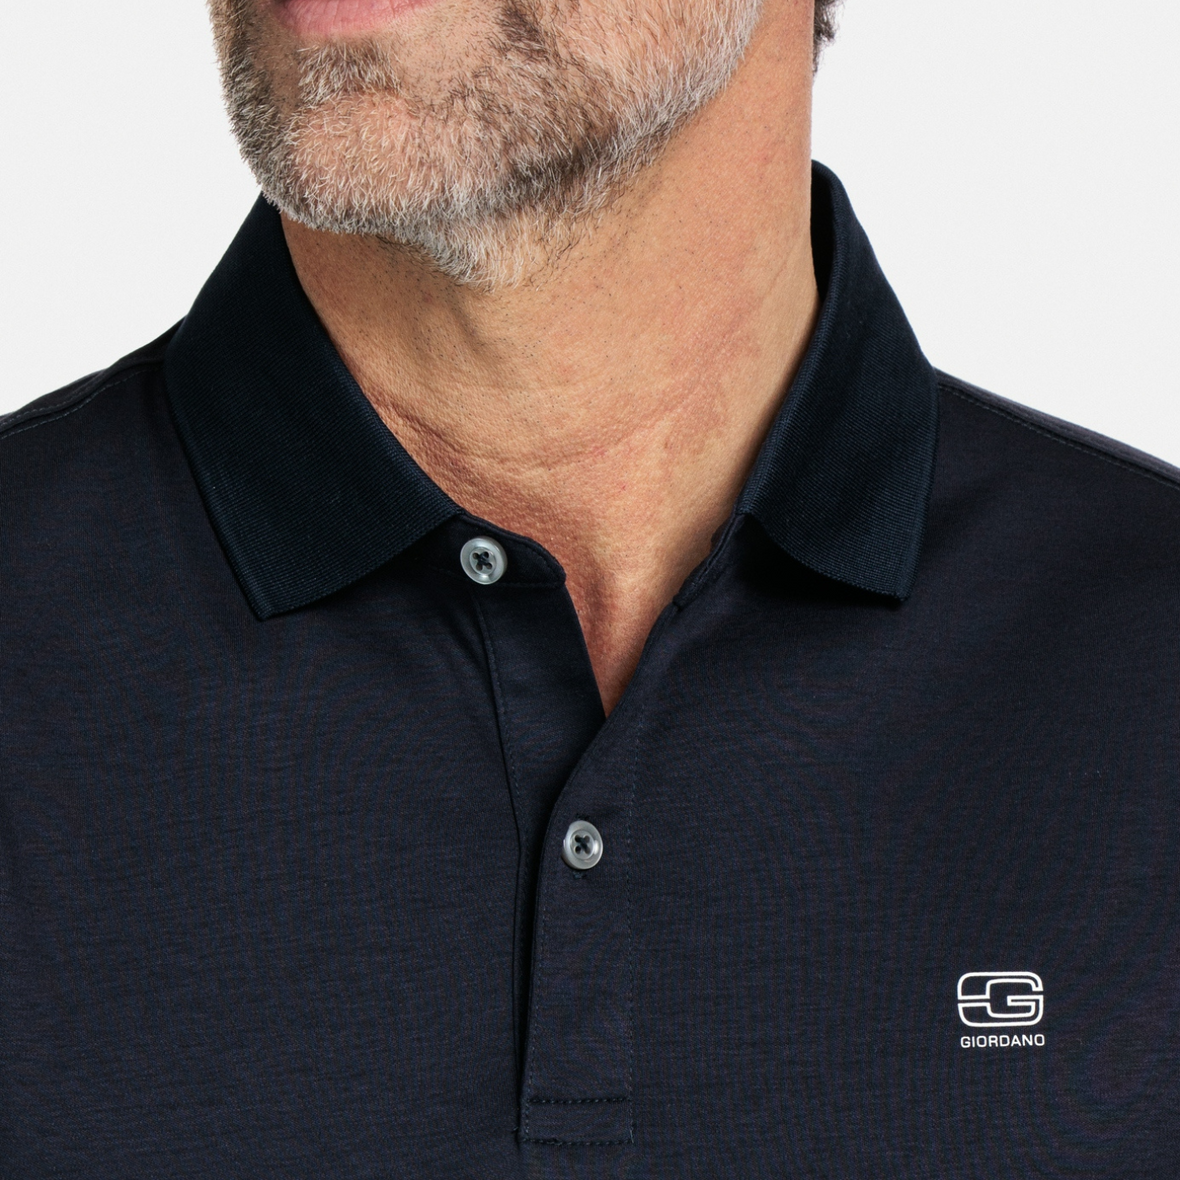 Up close image of polo shirt and button detail 